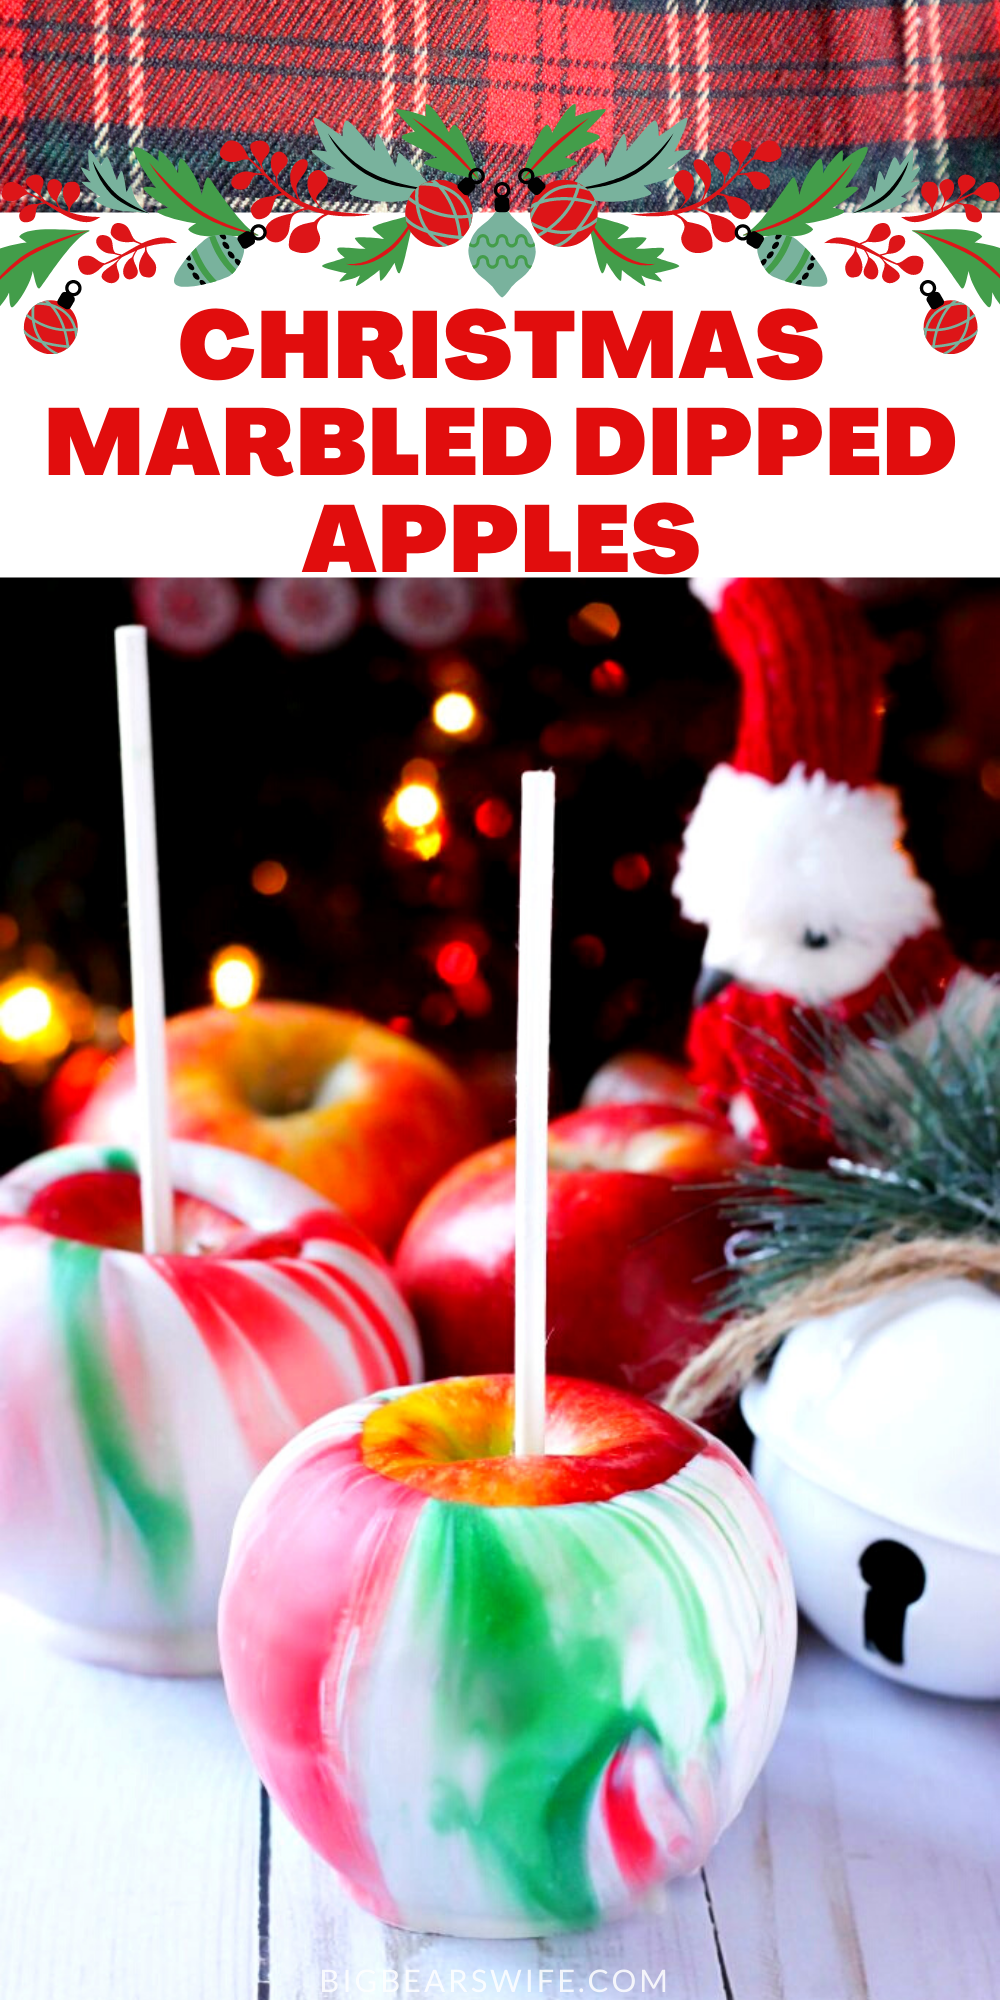 Christmas Marbled Dipped Apples - Want to spruce up a gift card as a gift? Want to make Christmas themed treats for your party? These Christmas Marbled Dipped Apples are the answer!! via @bigbearswife